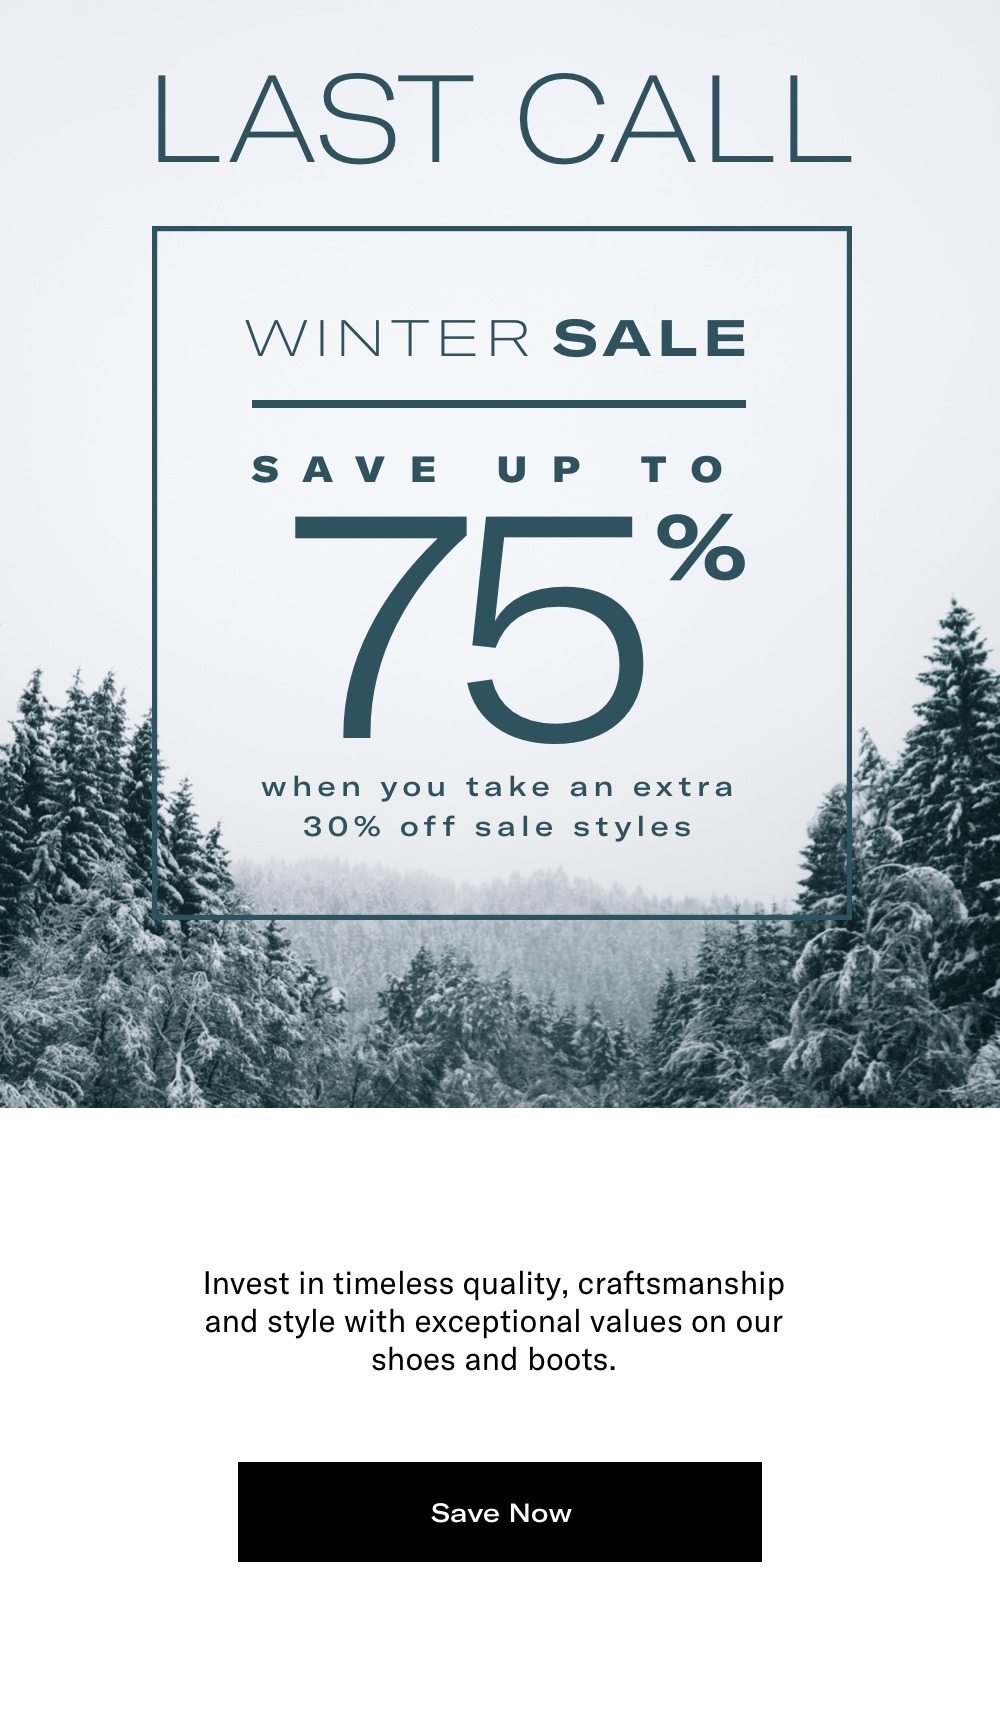 Winter Sale Save Up To 75% Off